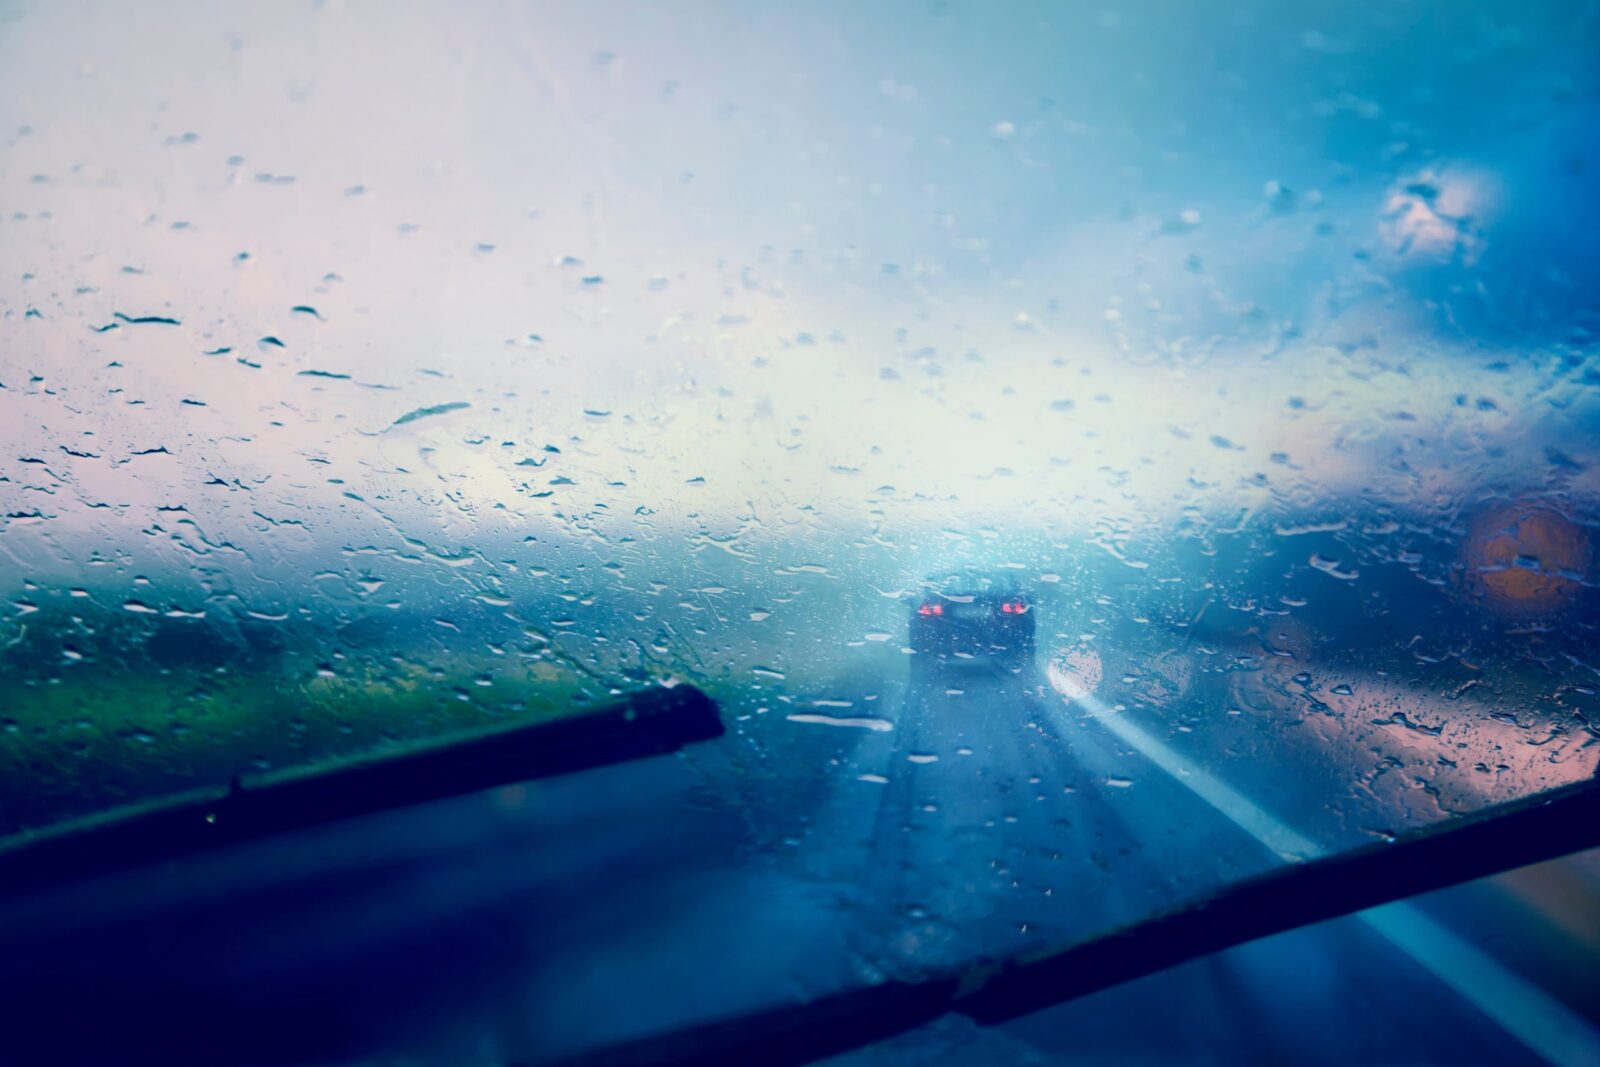 Abstract blurred bad weather vehicle driving